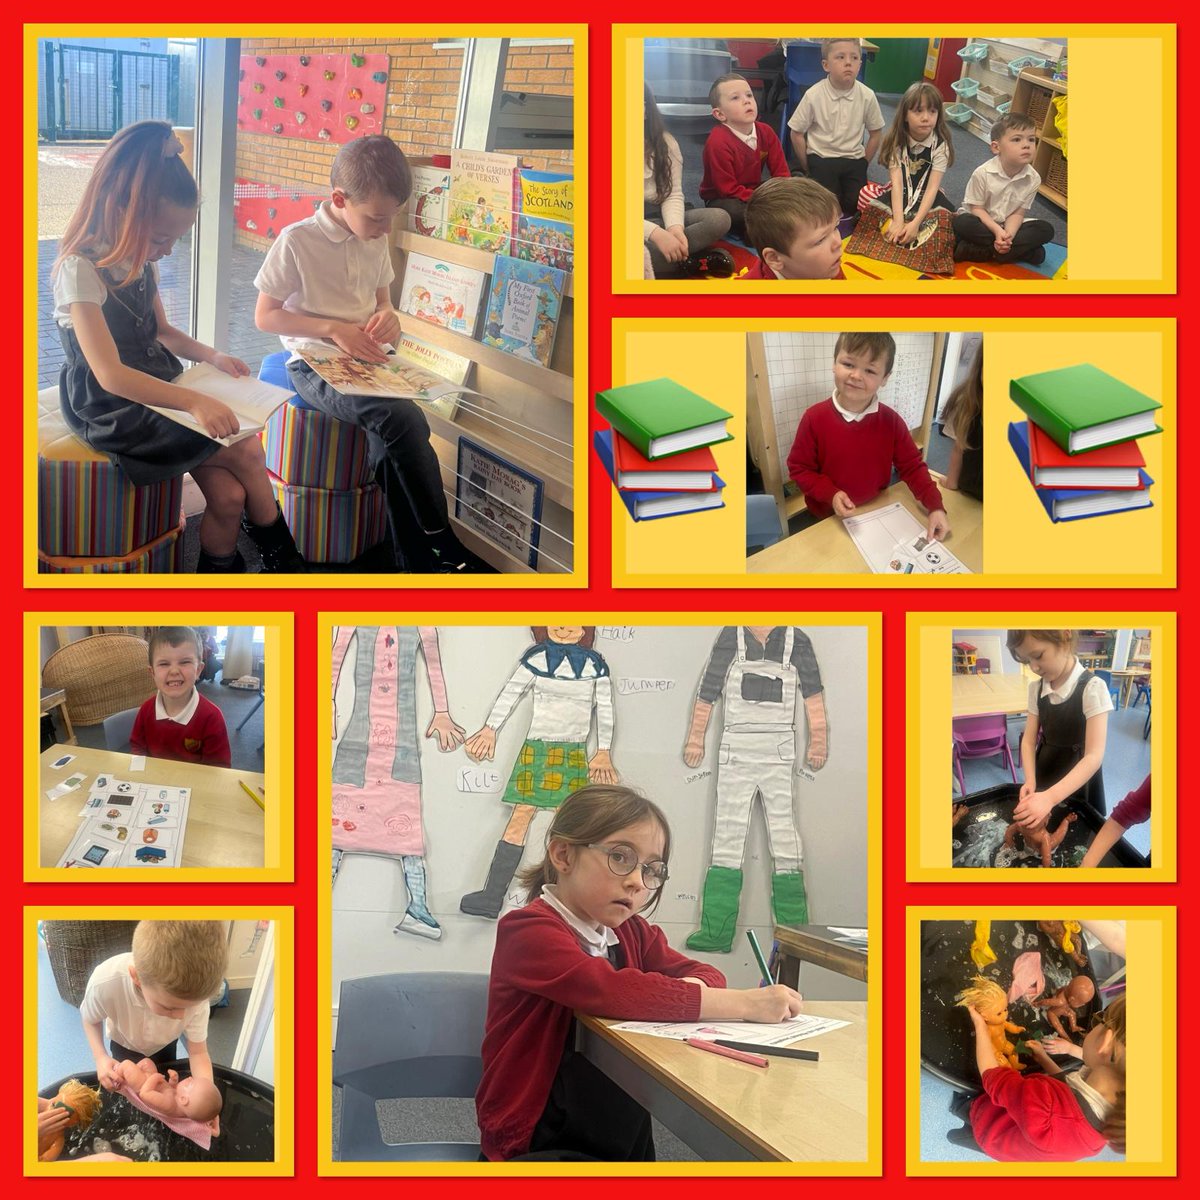 P2x enjoyed our activities in Story Land, we have loved ‘Katie Morag and the Tiresome Ted’ and ‘Katie Morag and the Two Gramdmothers’.  #learningthroughstories